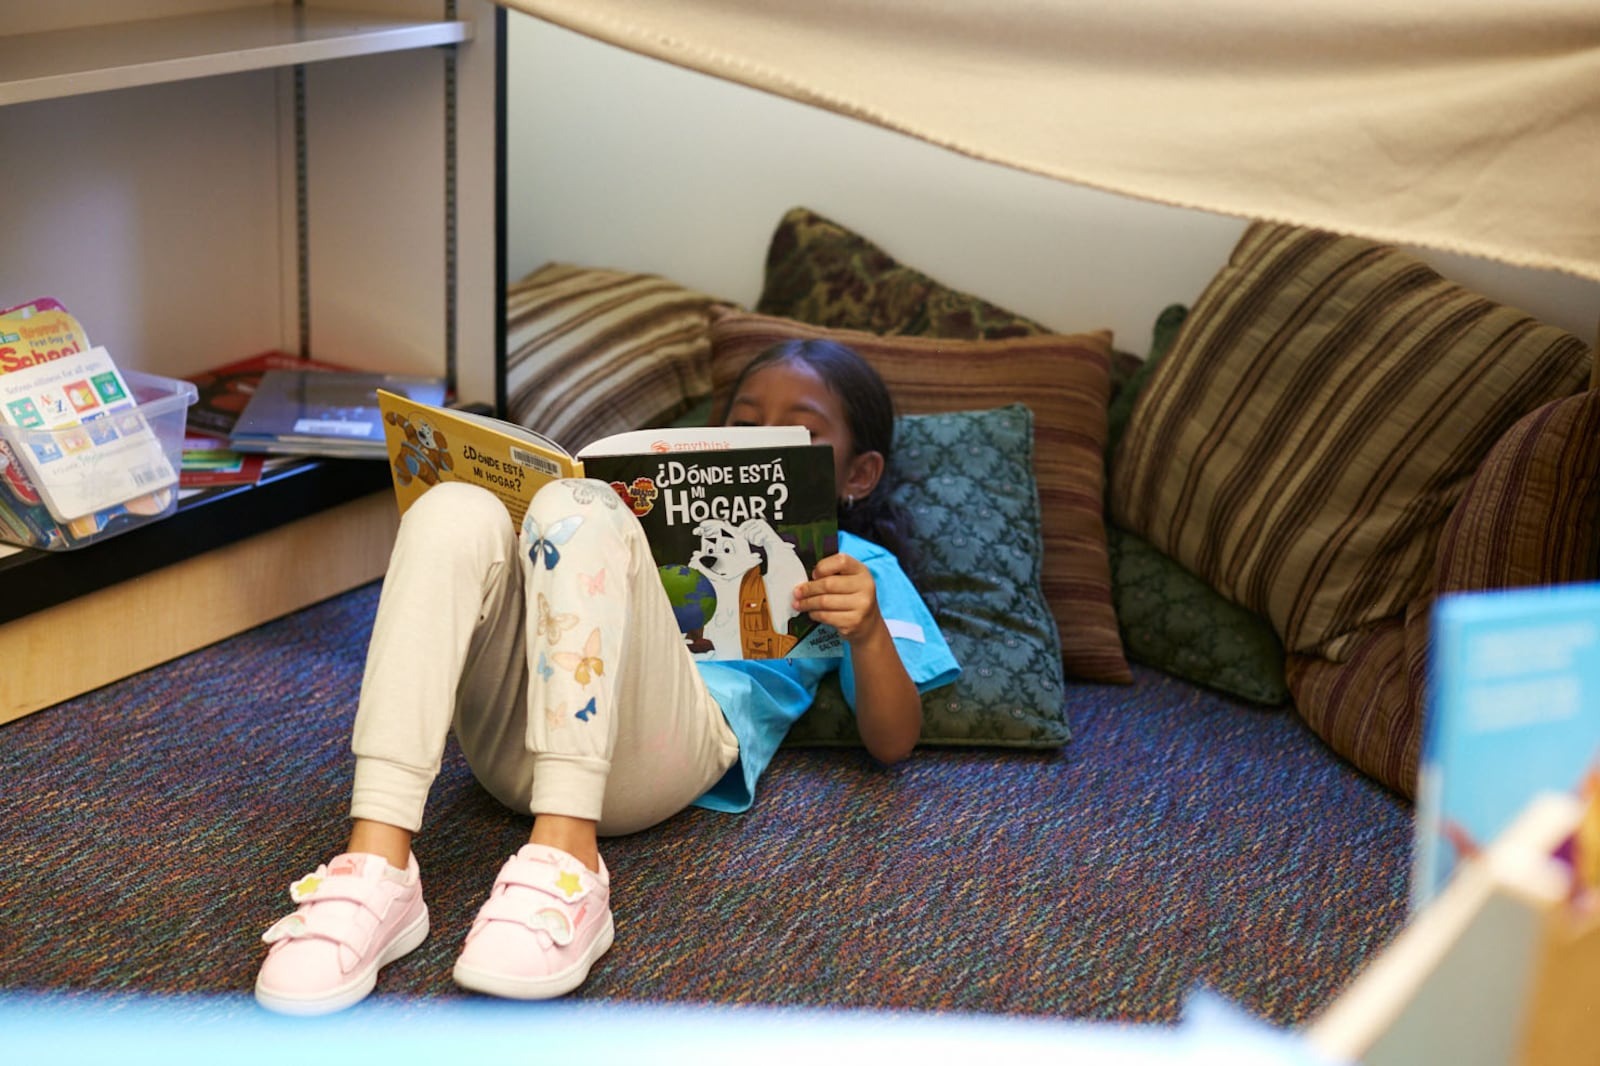 A girl lays down on the floor against pillows reading a book.